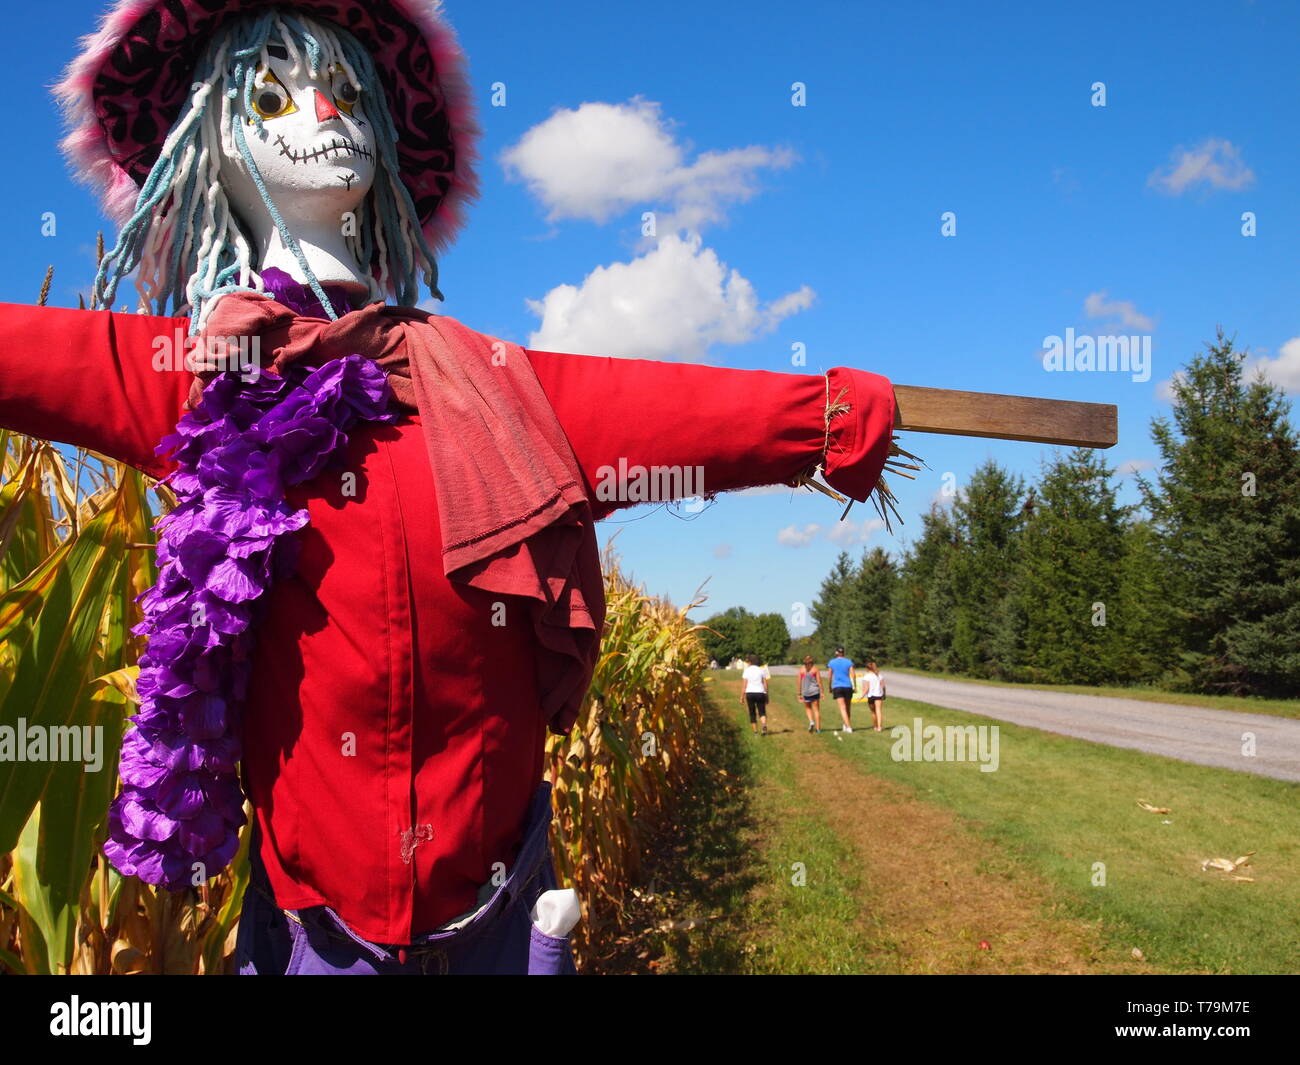 A family walks past a scarecrow in a red shirt standing by a field of corn, Ontario, Canada. Stock Photo